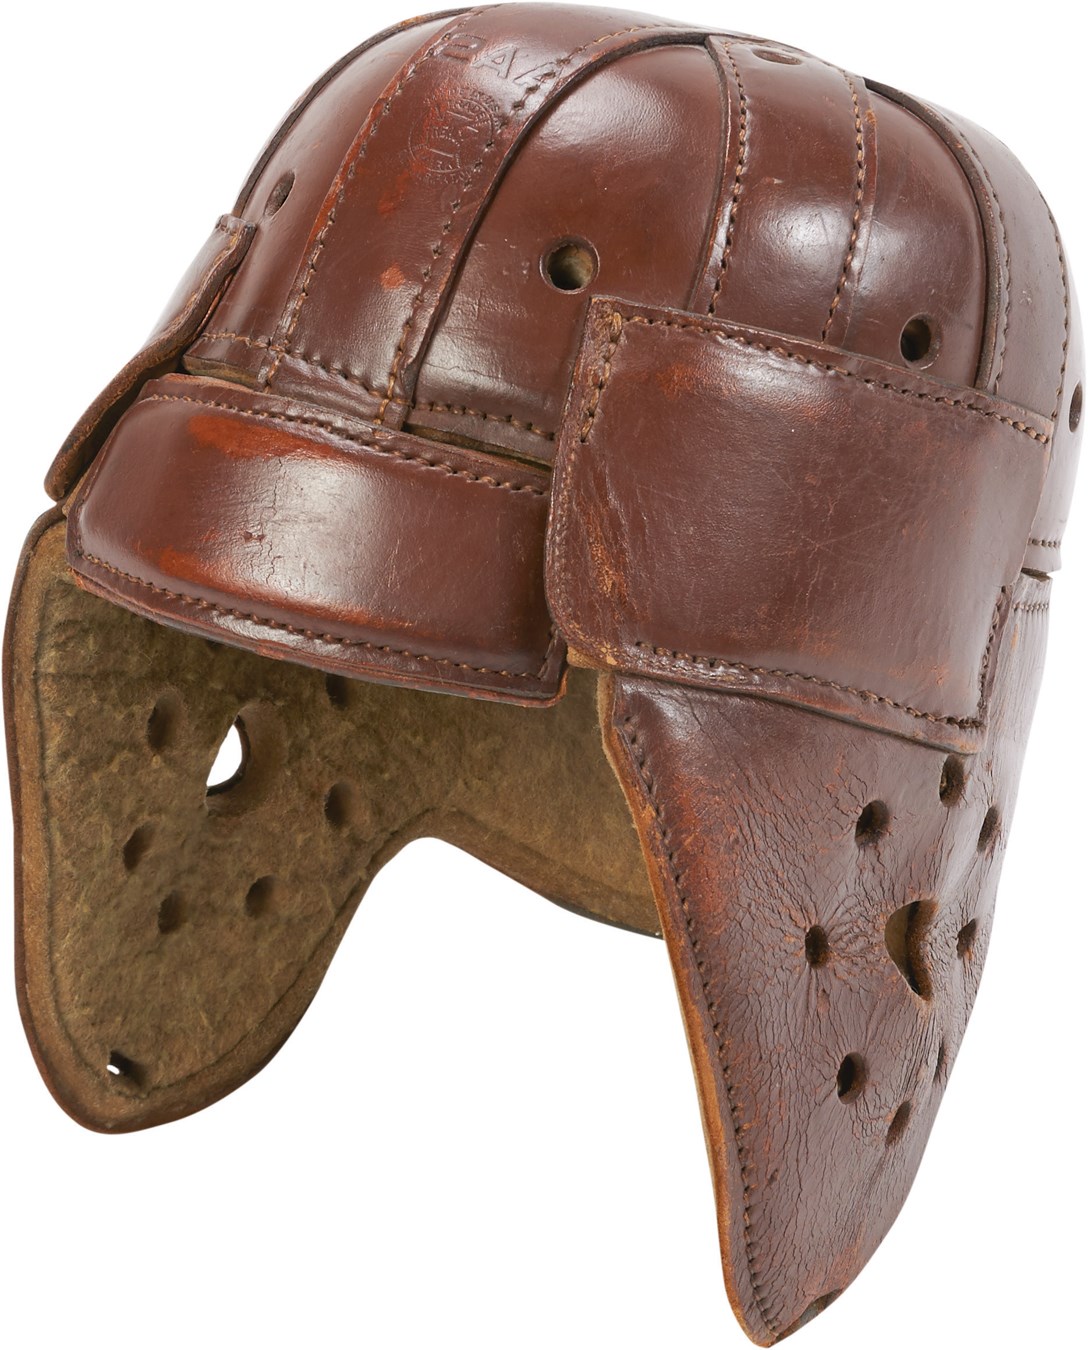 1930s Reach Football Helmet with Added Temple Protection